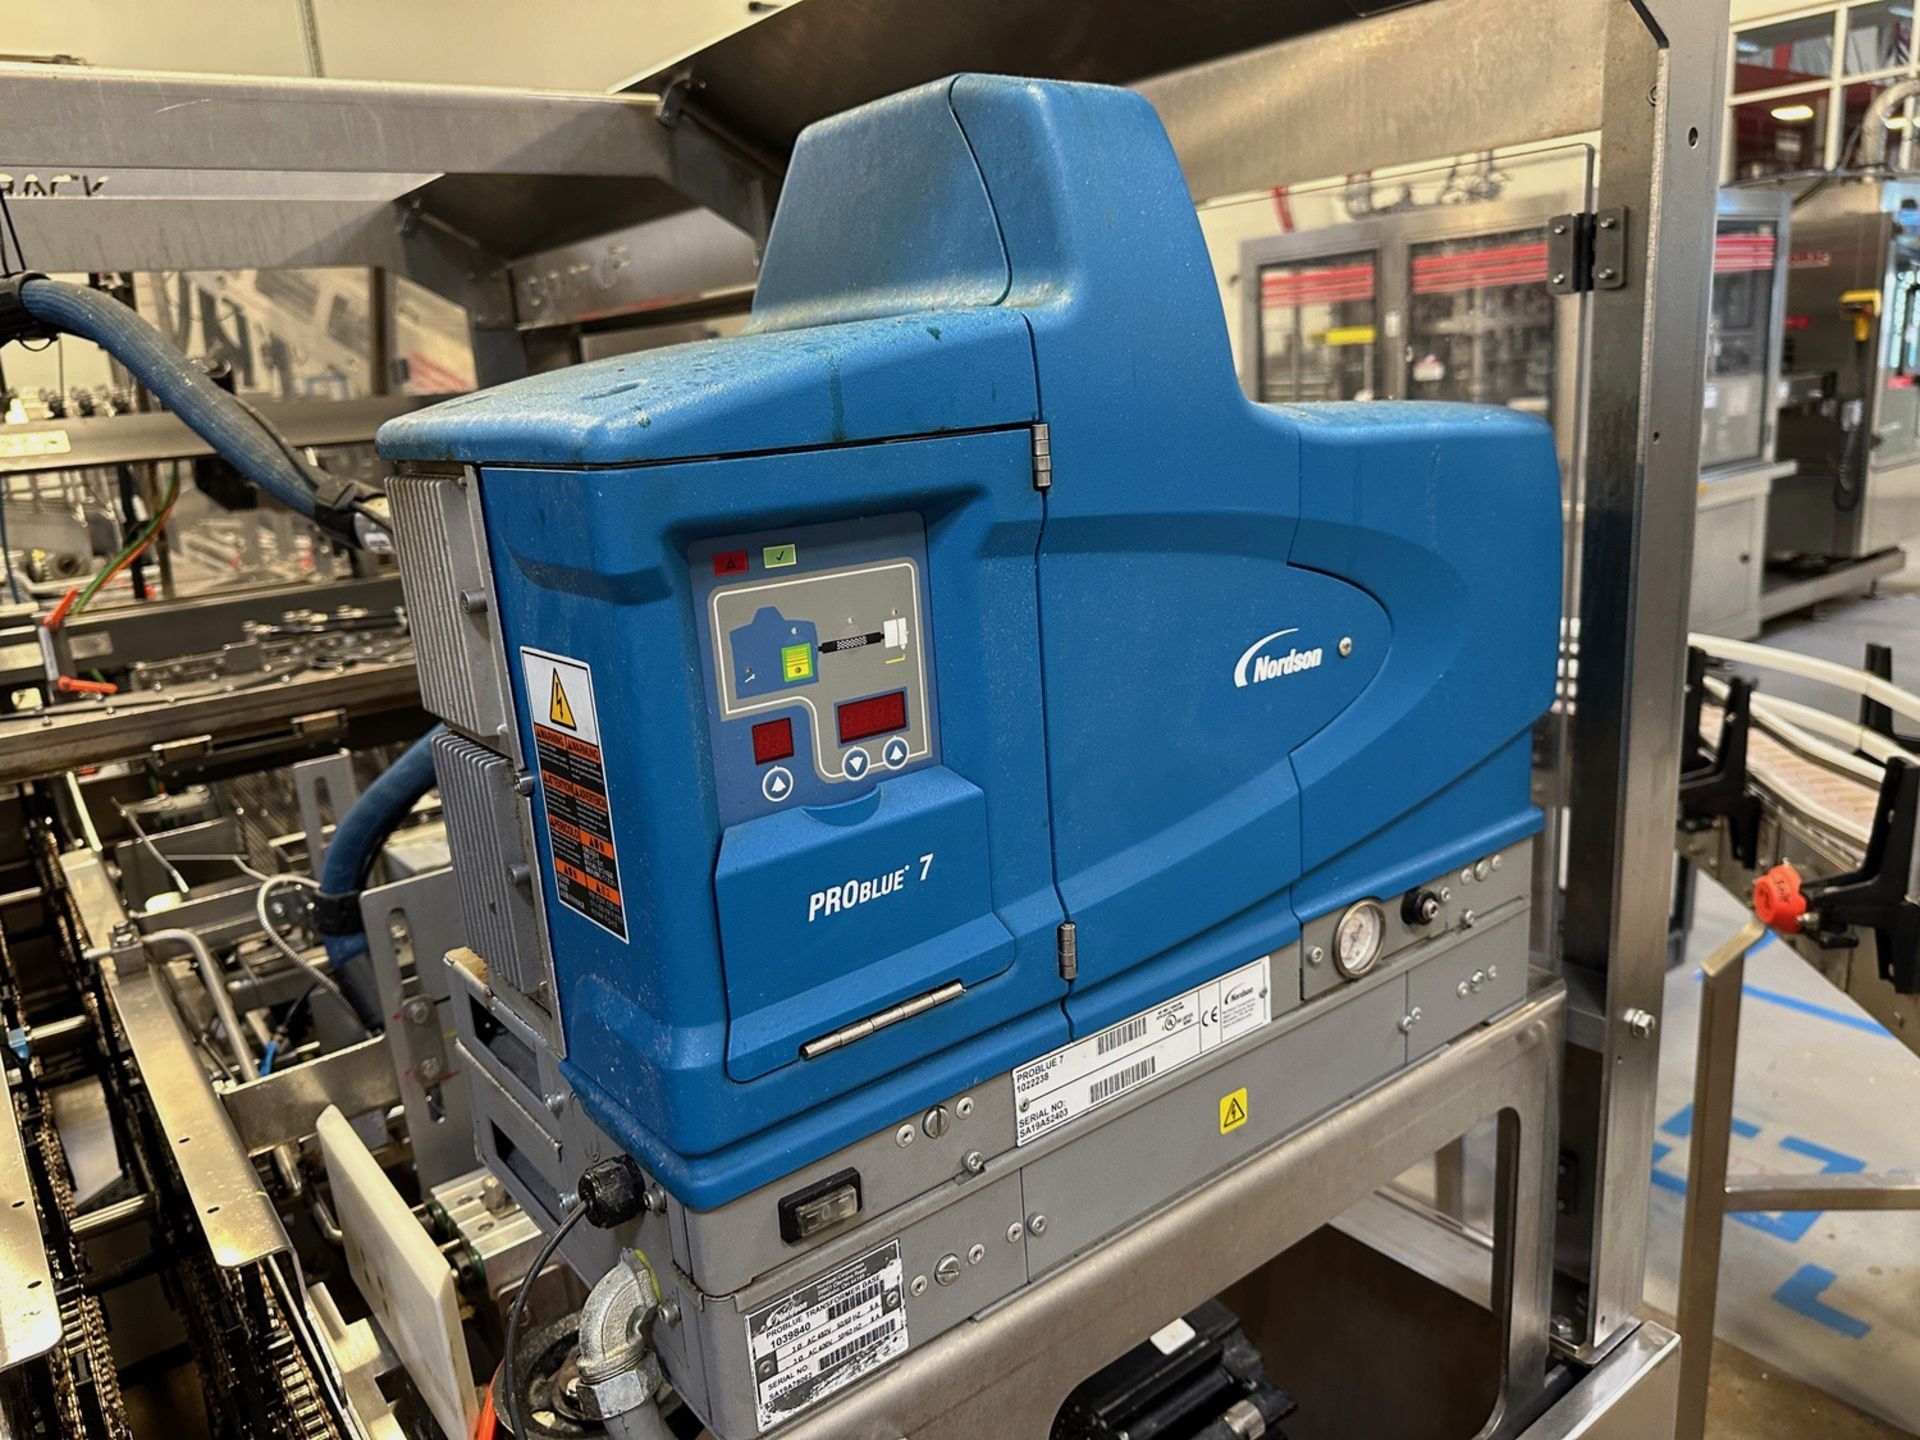 2019 Switchback Brew Pack 200 Intermittent Motion Cartoner - Model AI- 2H BP200, Nordson ProBlue 7 - Image 4 of 9